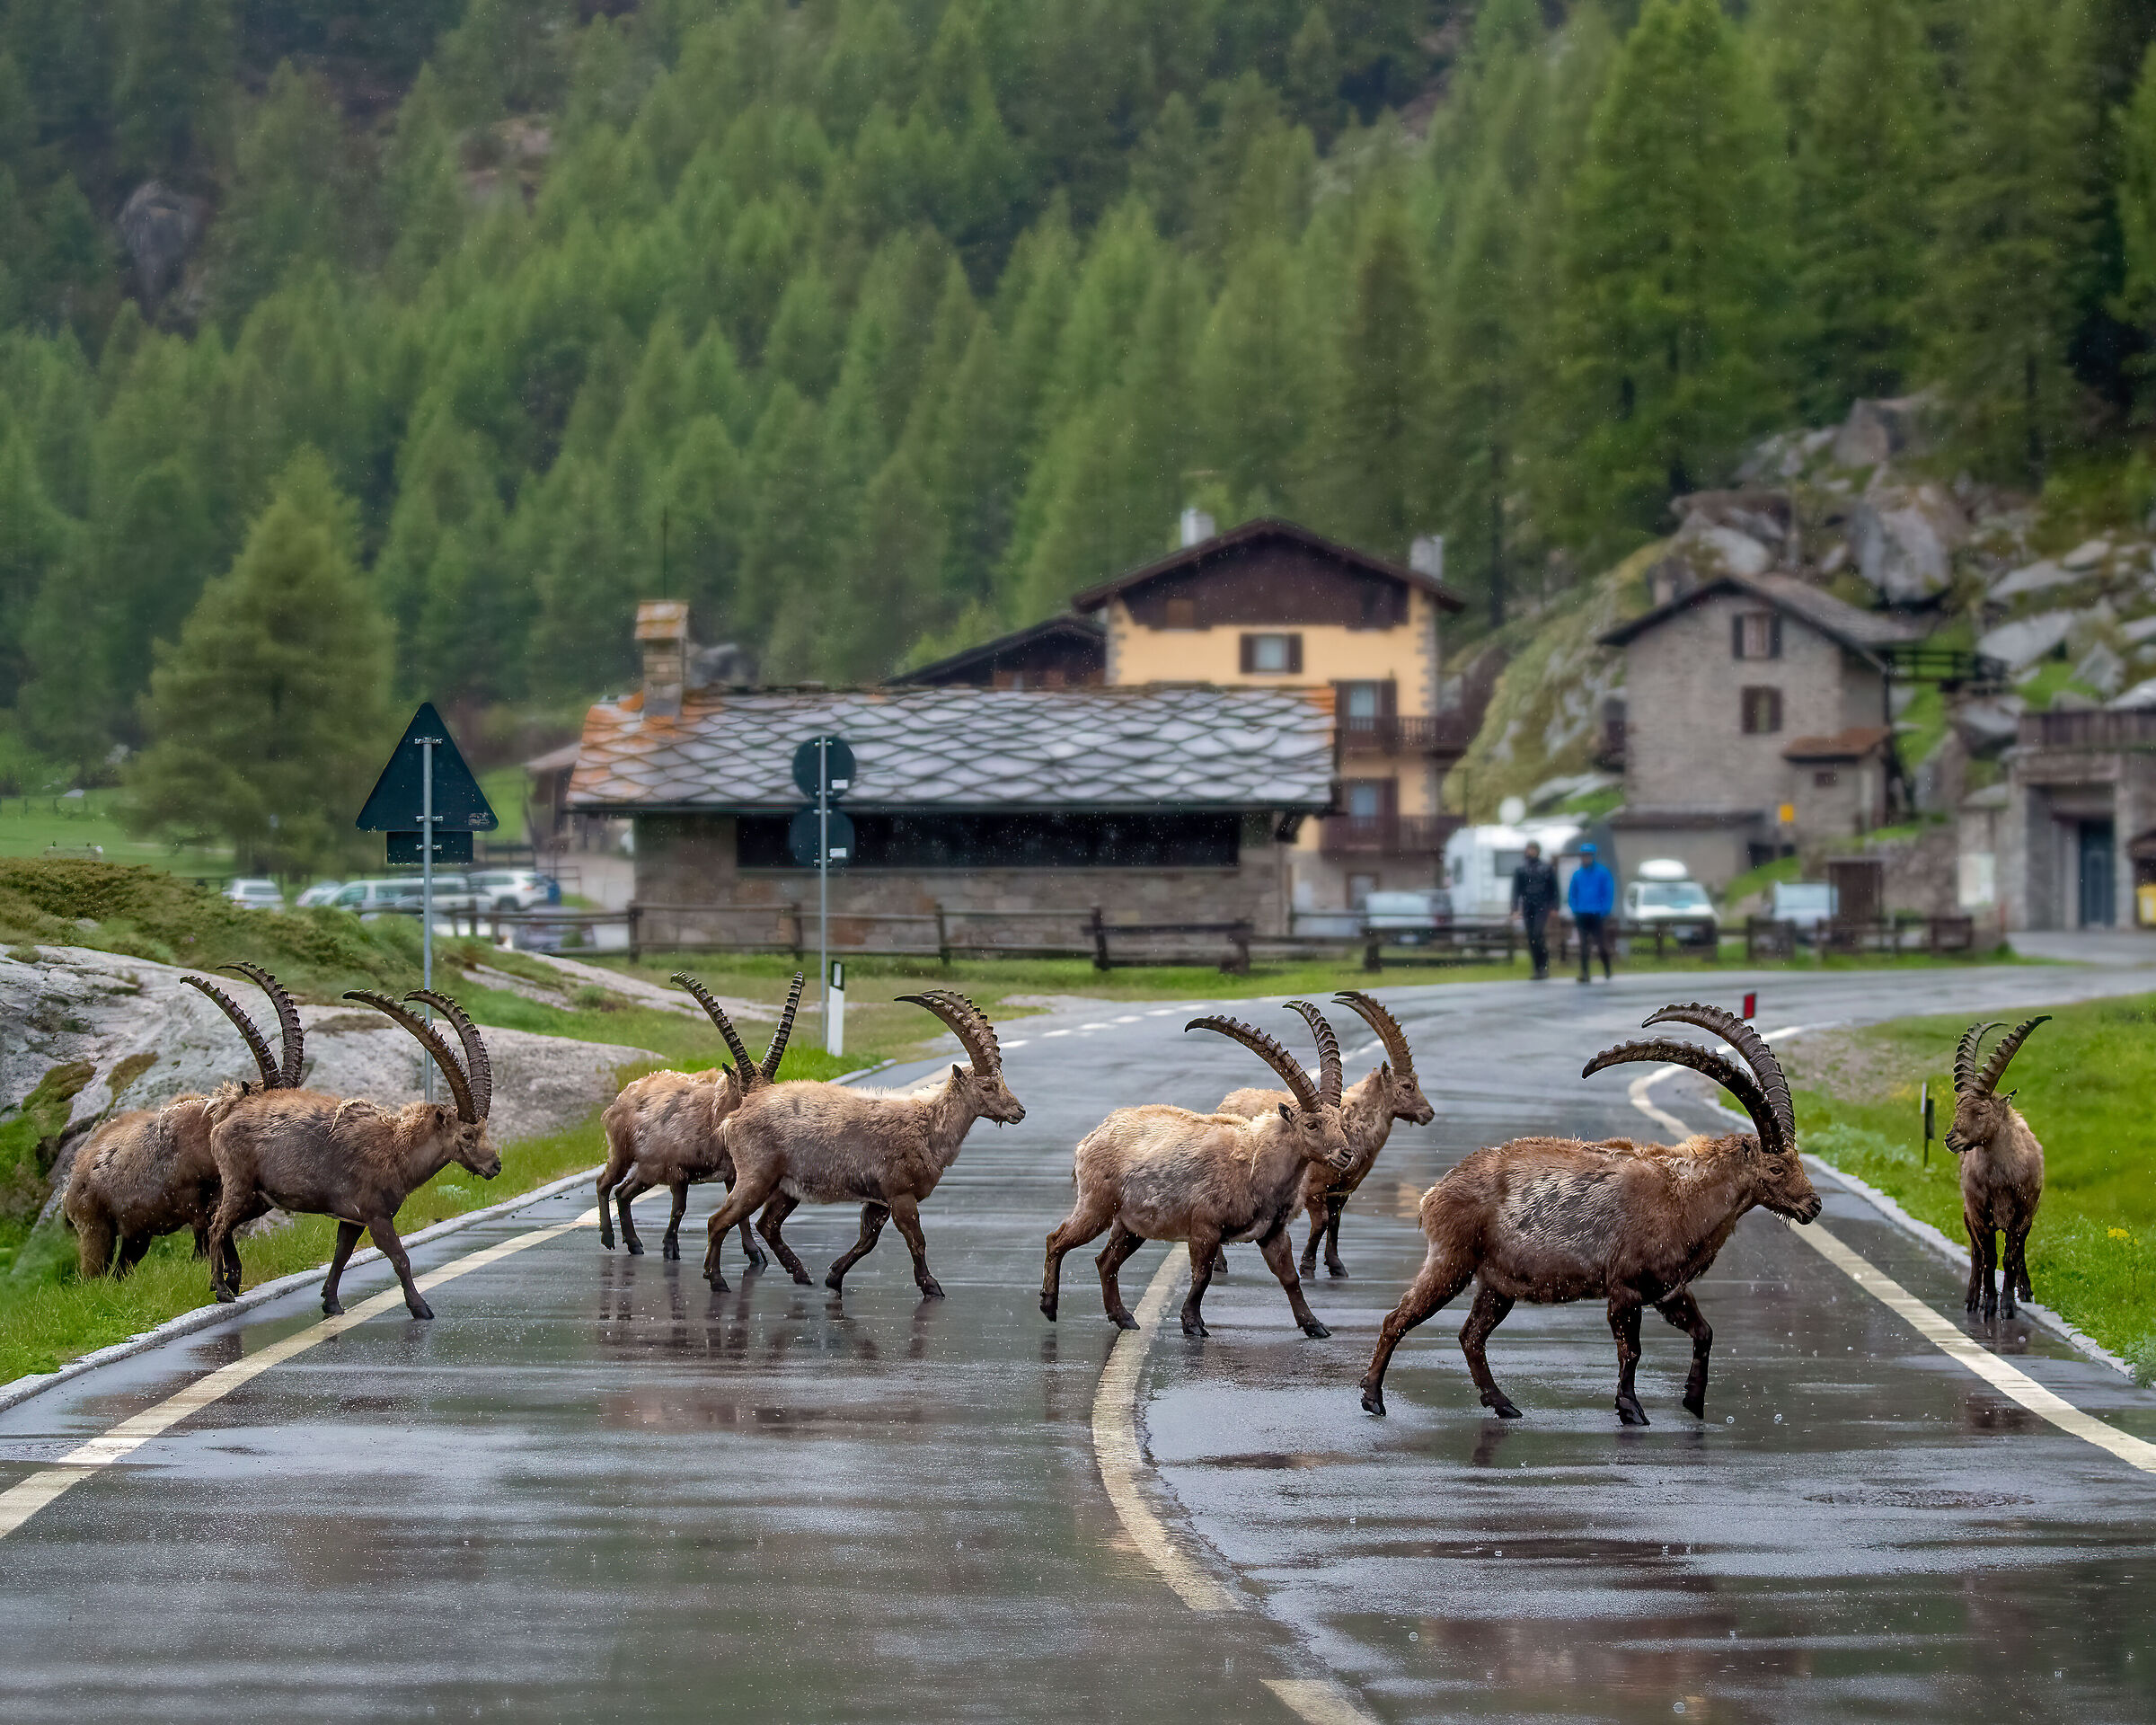 Ibexes in the street ...